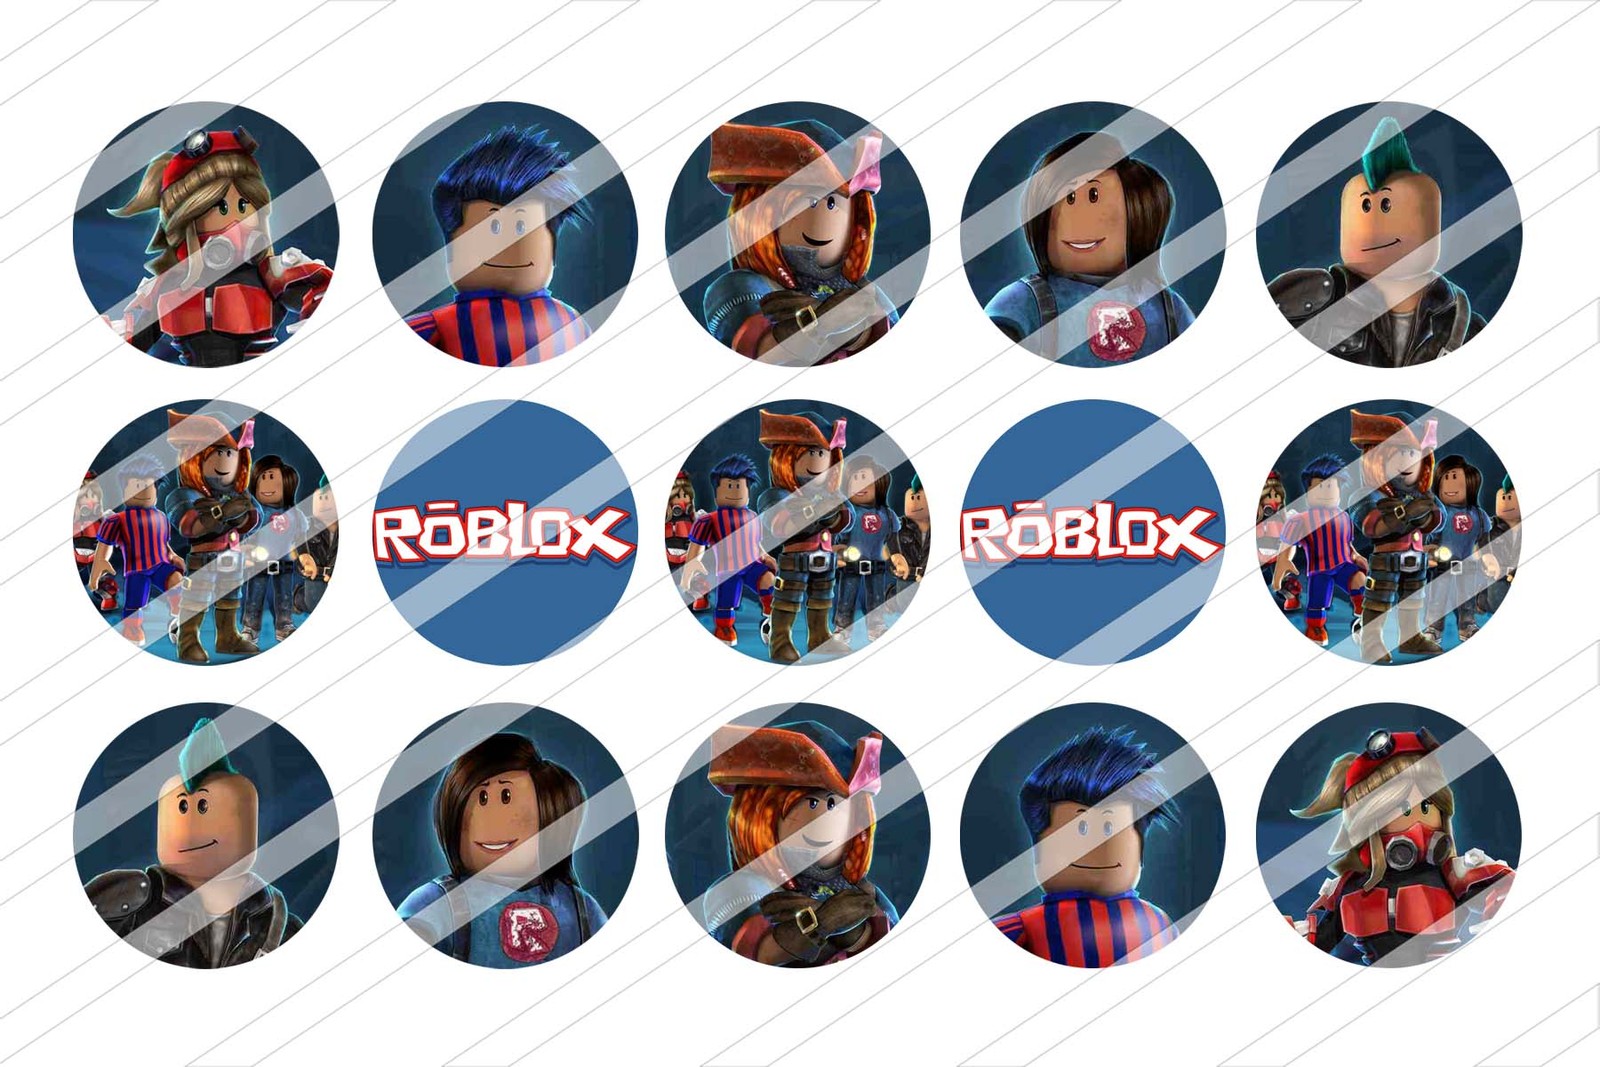 Roblox Printable Bottlecap Images 1 Inch And 50 Similar Items - roblox toppers labels instant download roblox cupcakes